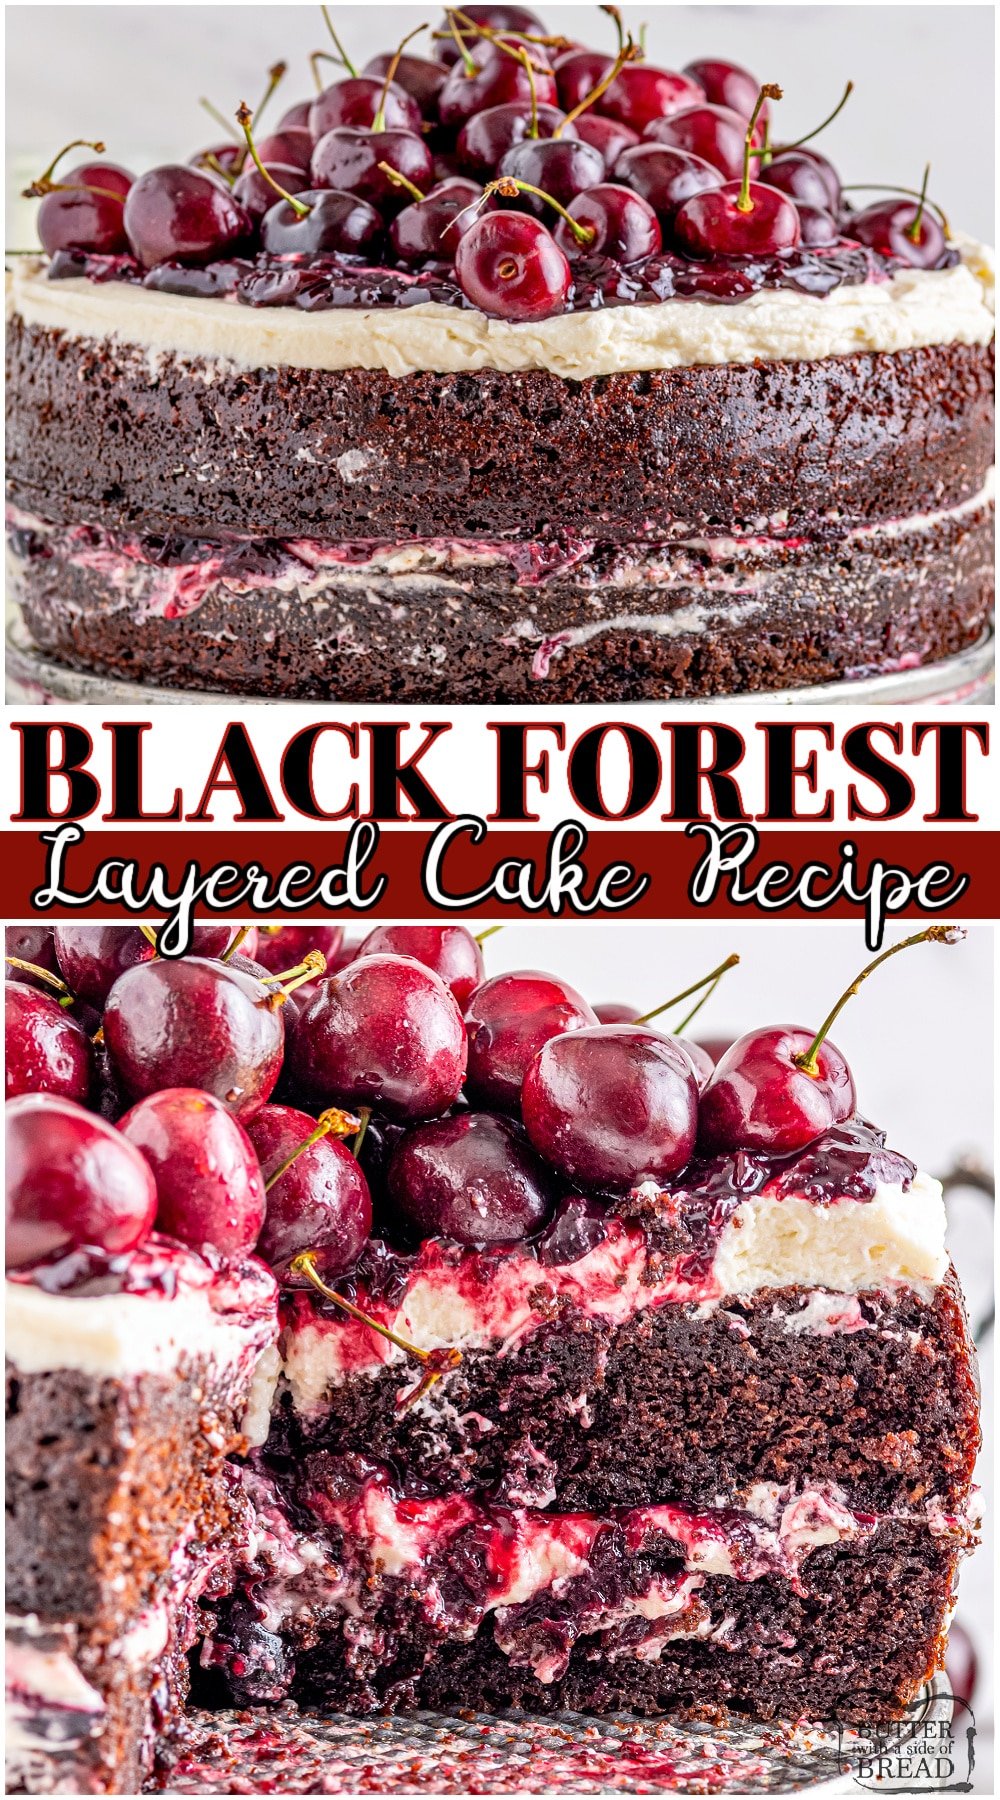 Homemade Black Forest Cake made with layers of chocolate cake, sweet cream and cherries! Elegant Black Forest Cherry Cake made from scratch and decorated easily with cherries & chocolate. #blackforest #cake #cherry #cherries #baking #easyrecipe from BUTTER WITH A SIDE OF BREAD